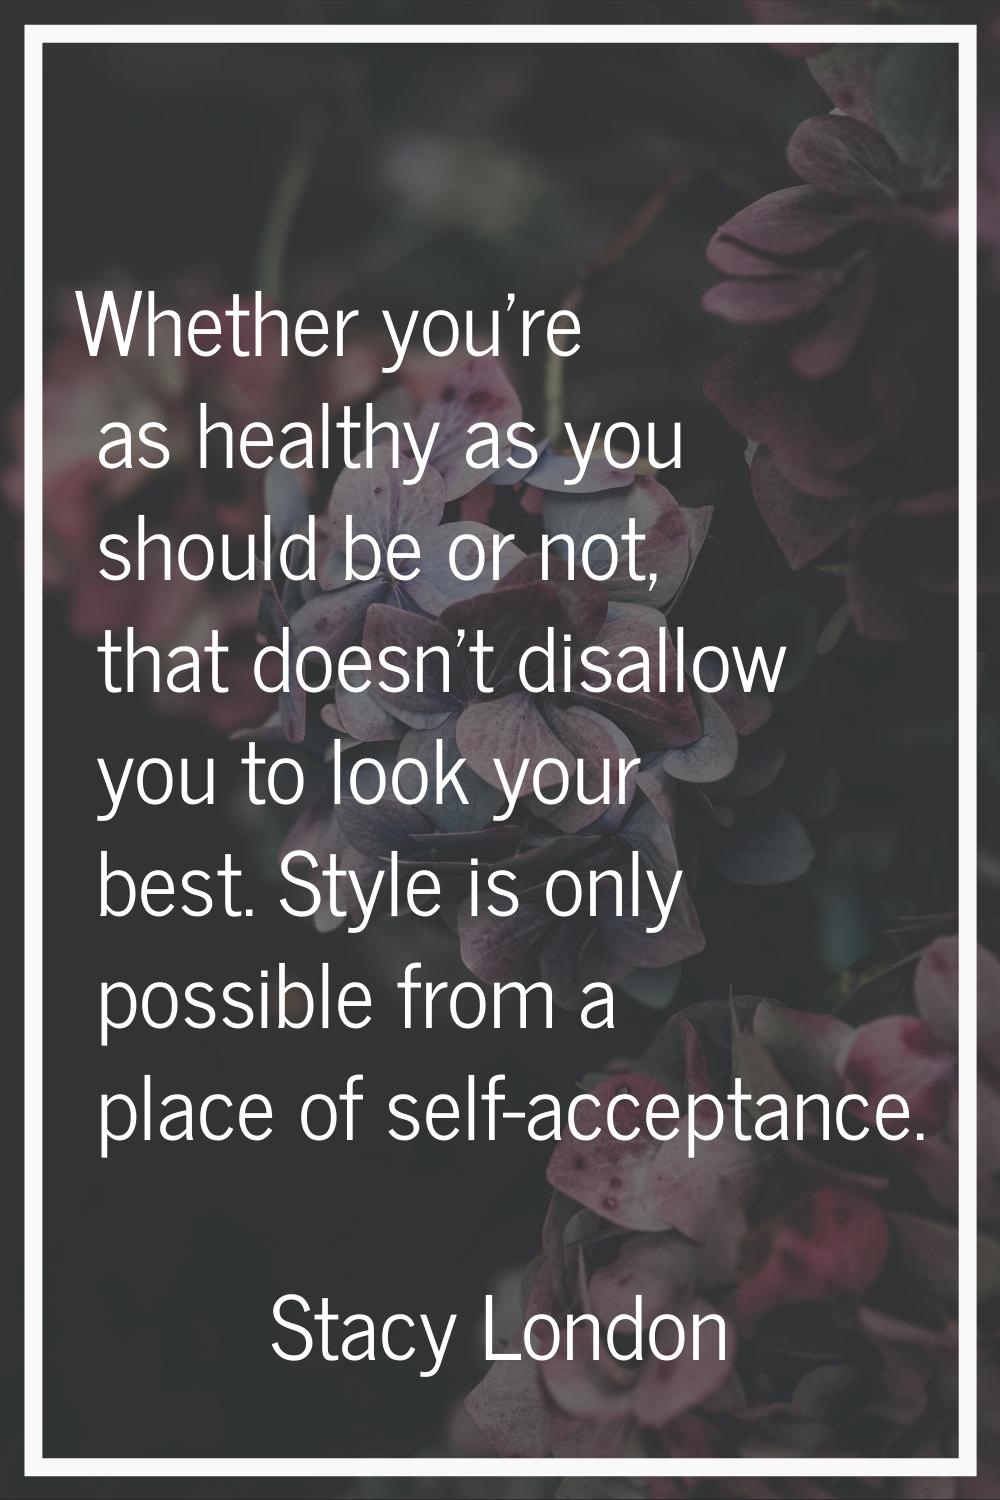 Whether you're as healthy as you should be or not, that doesn't disallow you to look your best. Sty